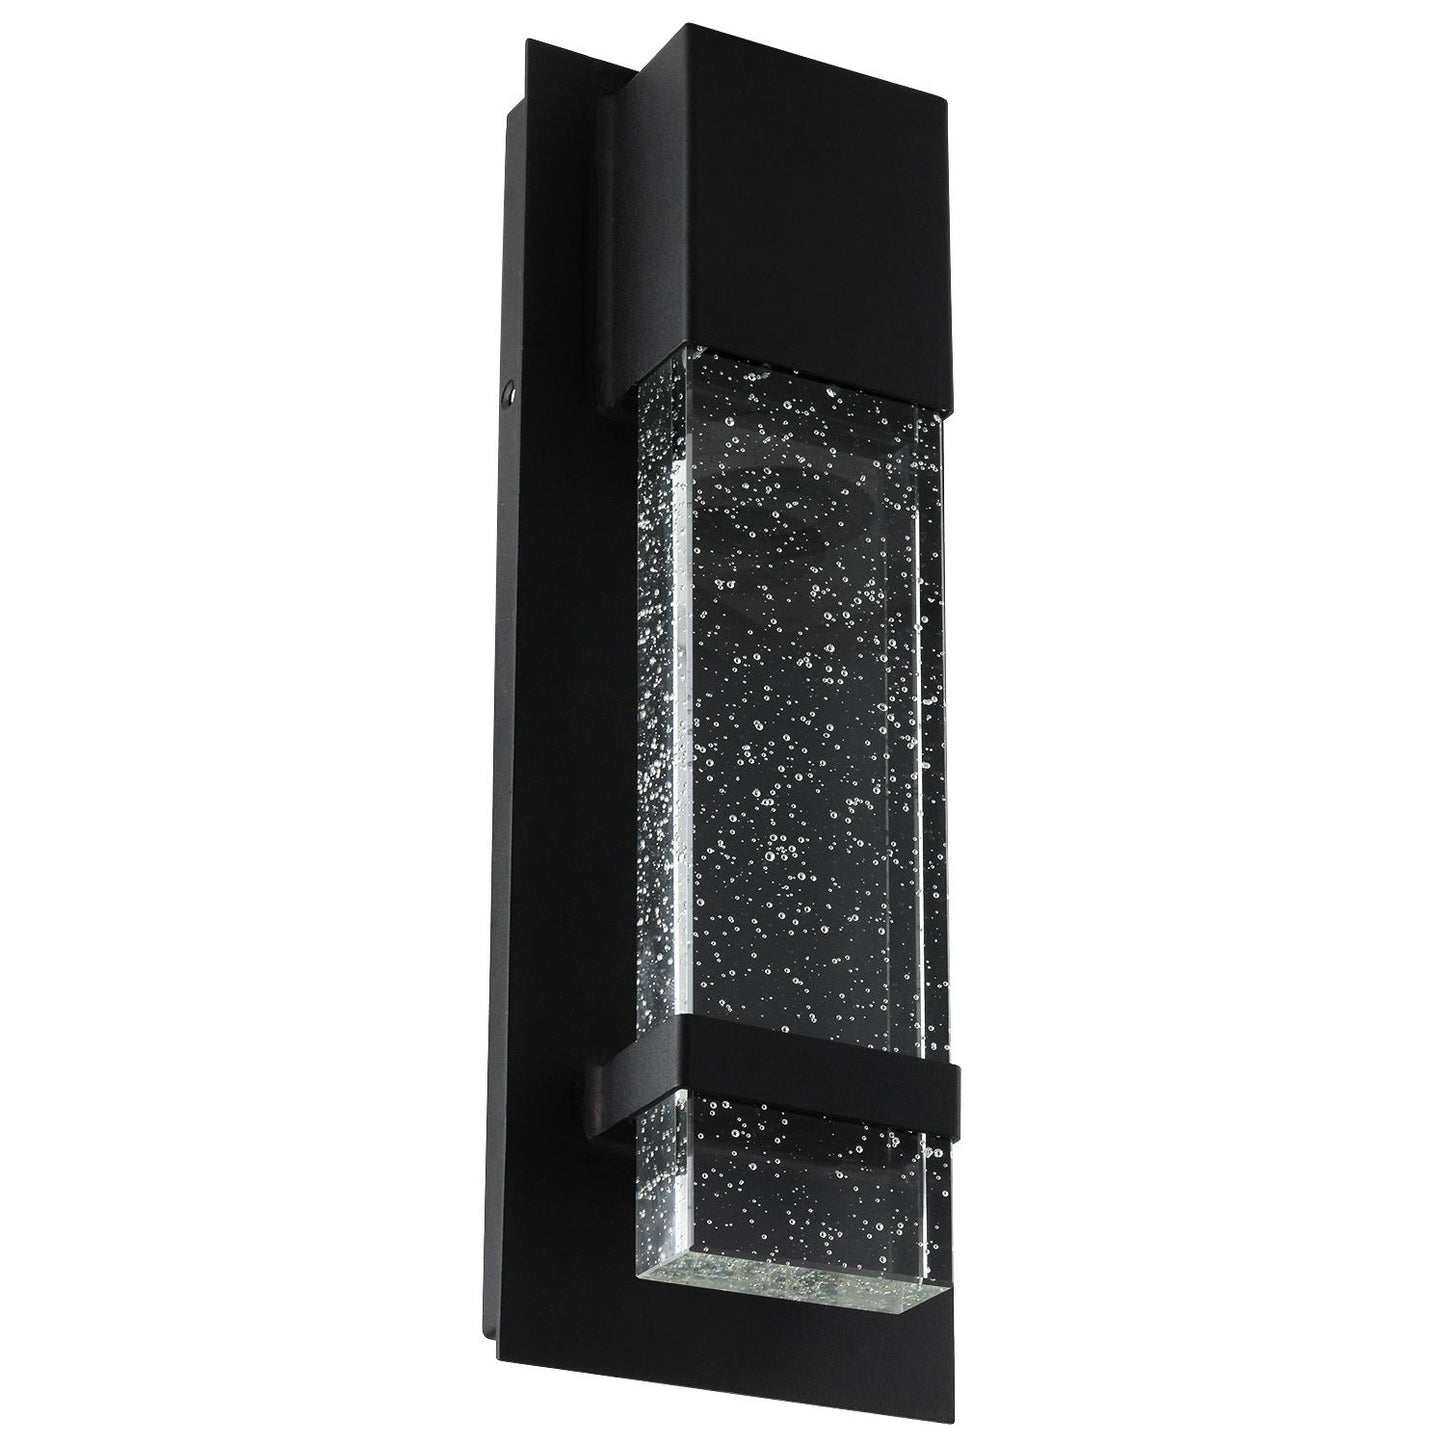 Sunlite LED Wall Sconce, Black Metal Frame with Raindrop Effect Glass Panel,  4.75" Wide, 5000K Super White, Indoor & Outdoor, ADA Compliant